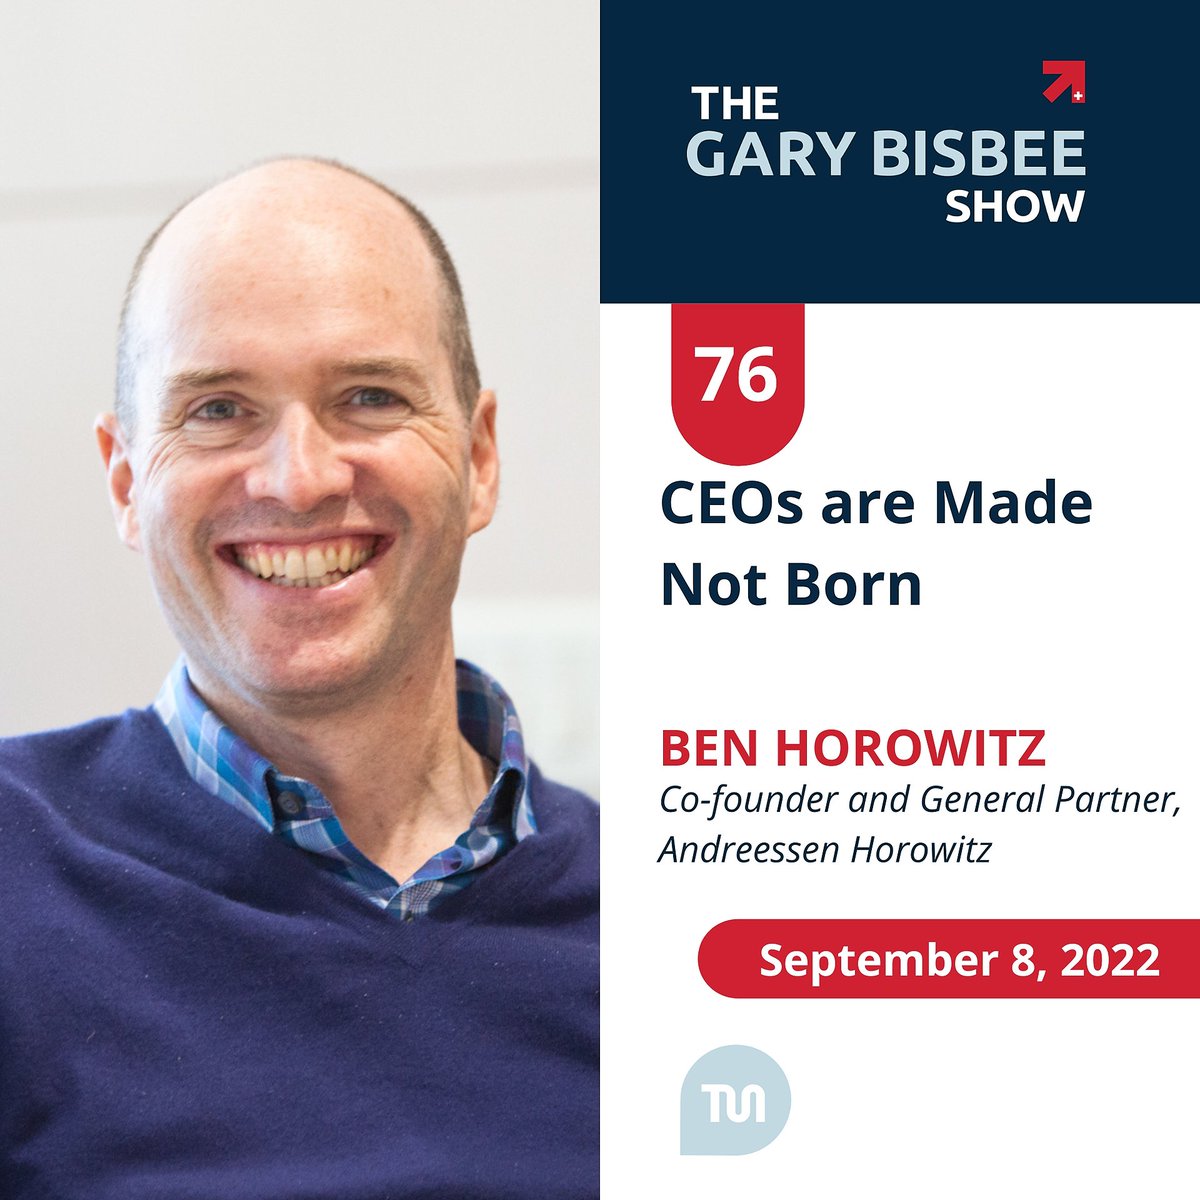 Don't miss tomorrow's new episode and season premiere of #TheGaryBisbeeShow! In this episode, Gary speaks with Ben Horowitz, Co-founder and General Partner, Andreesen Horowitz. Listen to the episode tomorrow on your favorite podcast app, or click here: bit.ly/3KWicXn